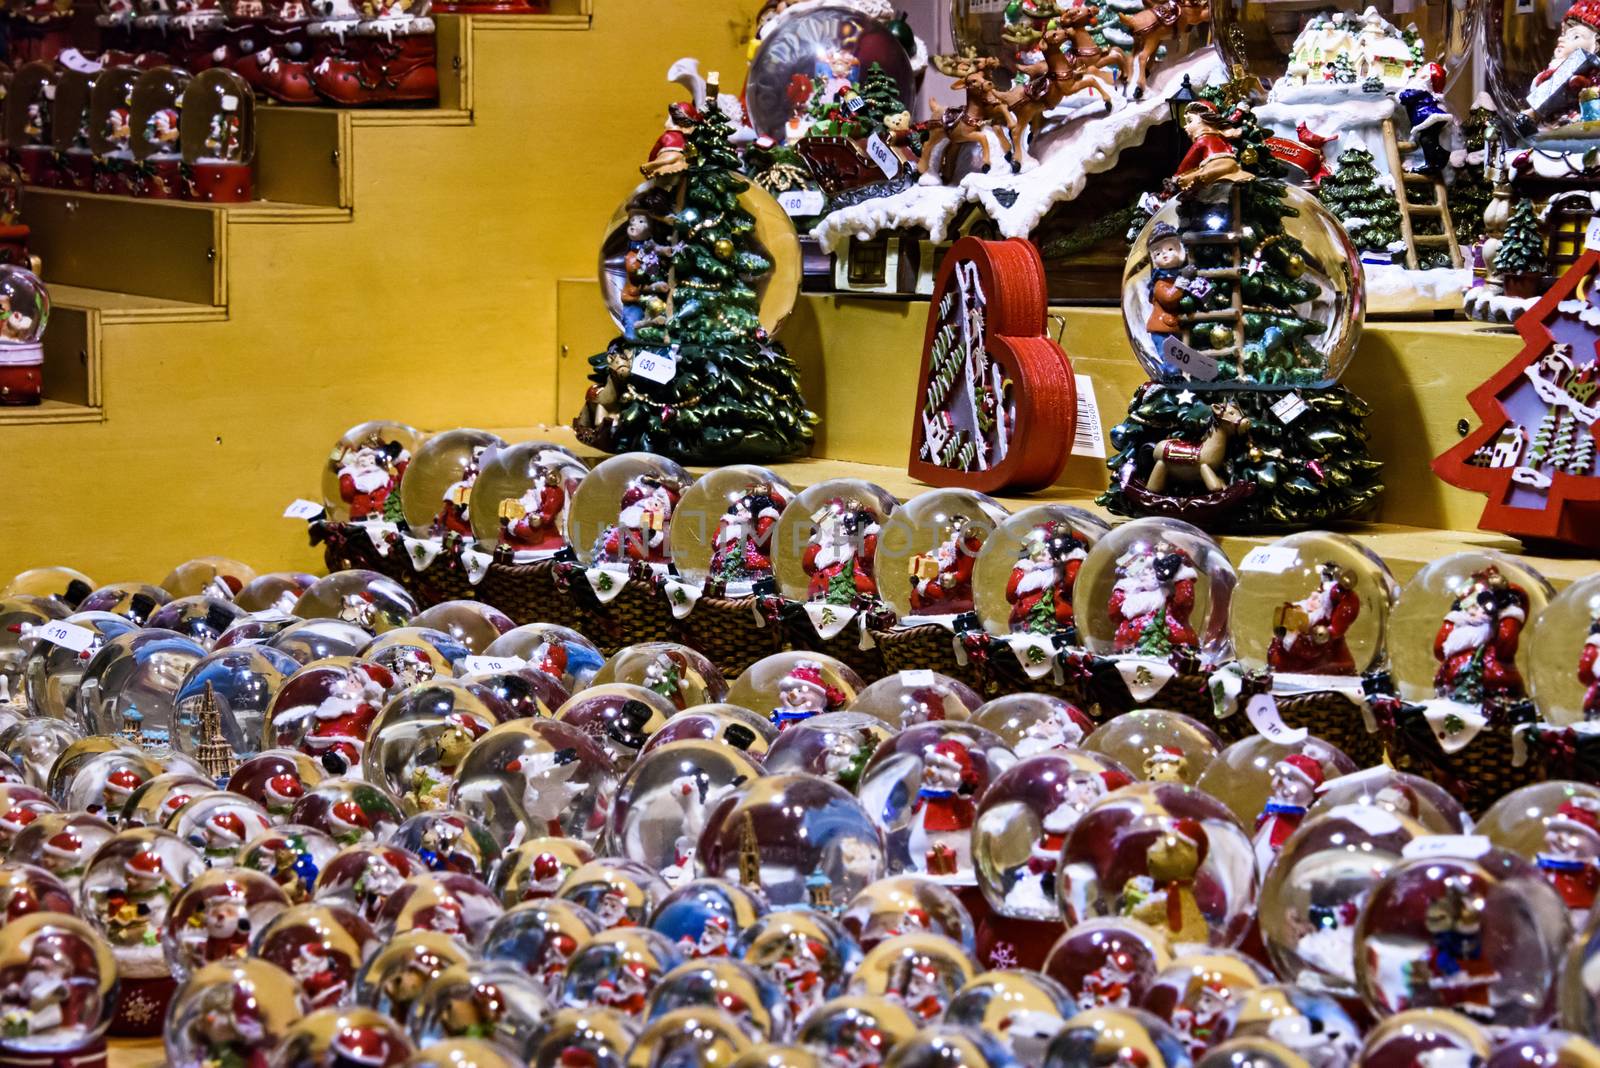 FRANCE, STRASBOURG - 20 DECEMBER 2017: Market stall with many snow globes and christmas ornaments for sale.